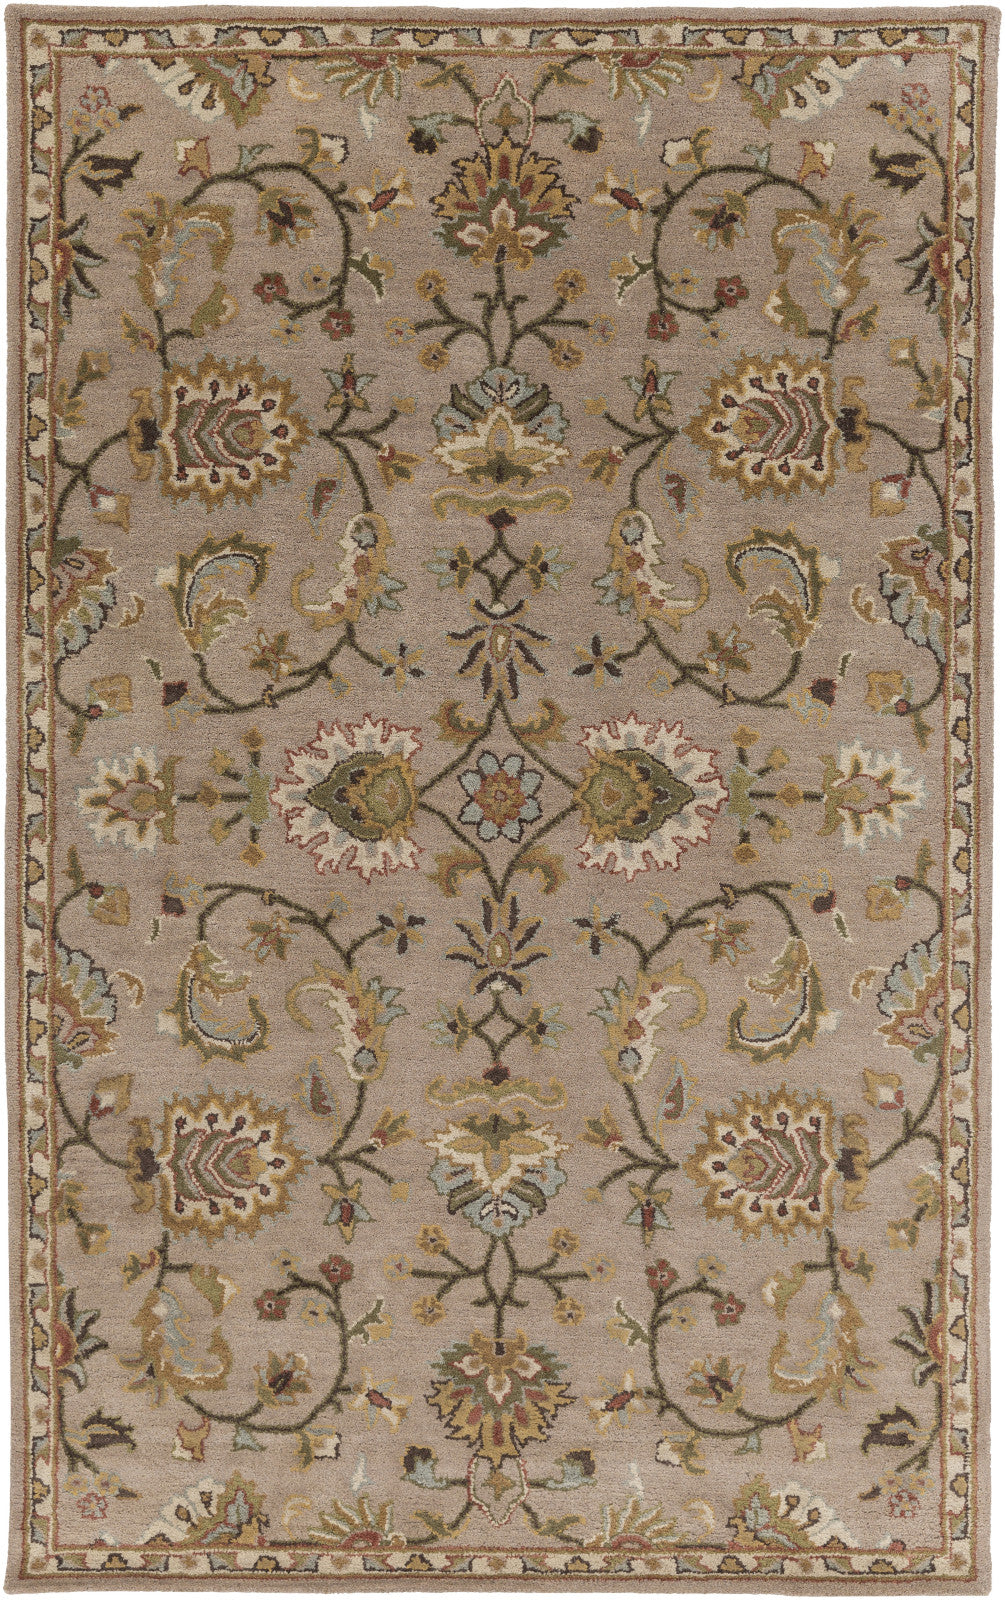 Artistic Weavers Middleton Mallie Taupe/Olive Green Area Rug main image